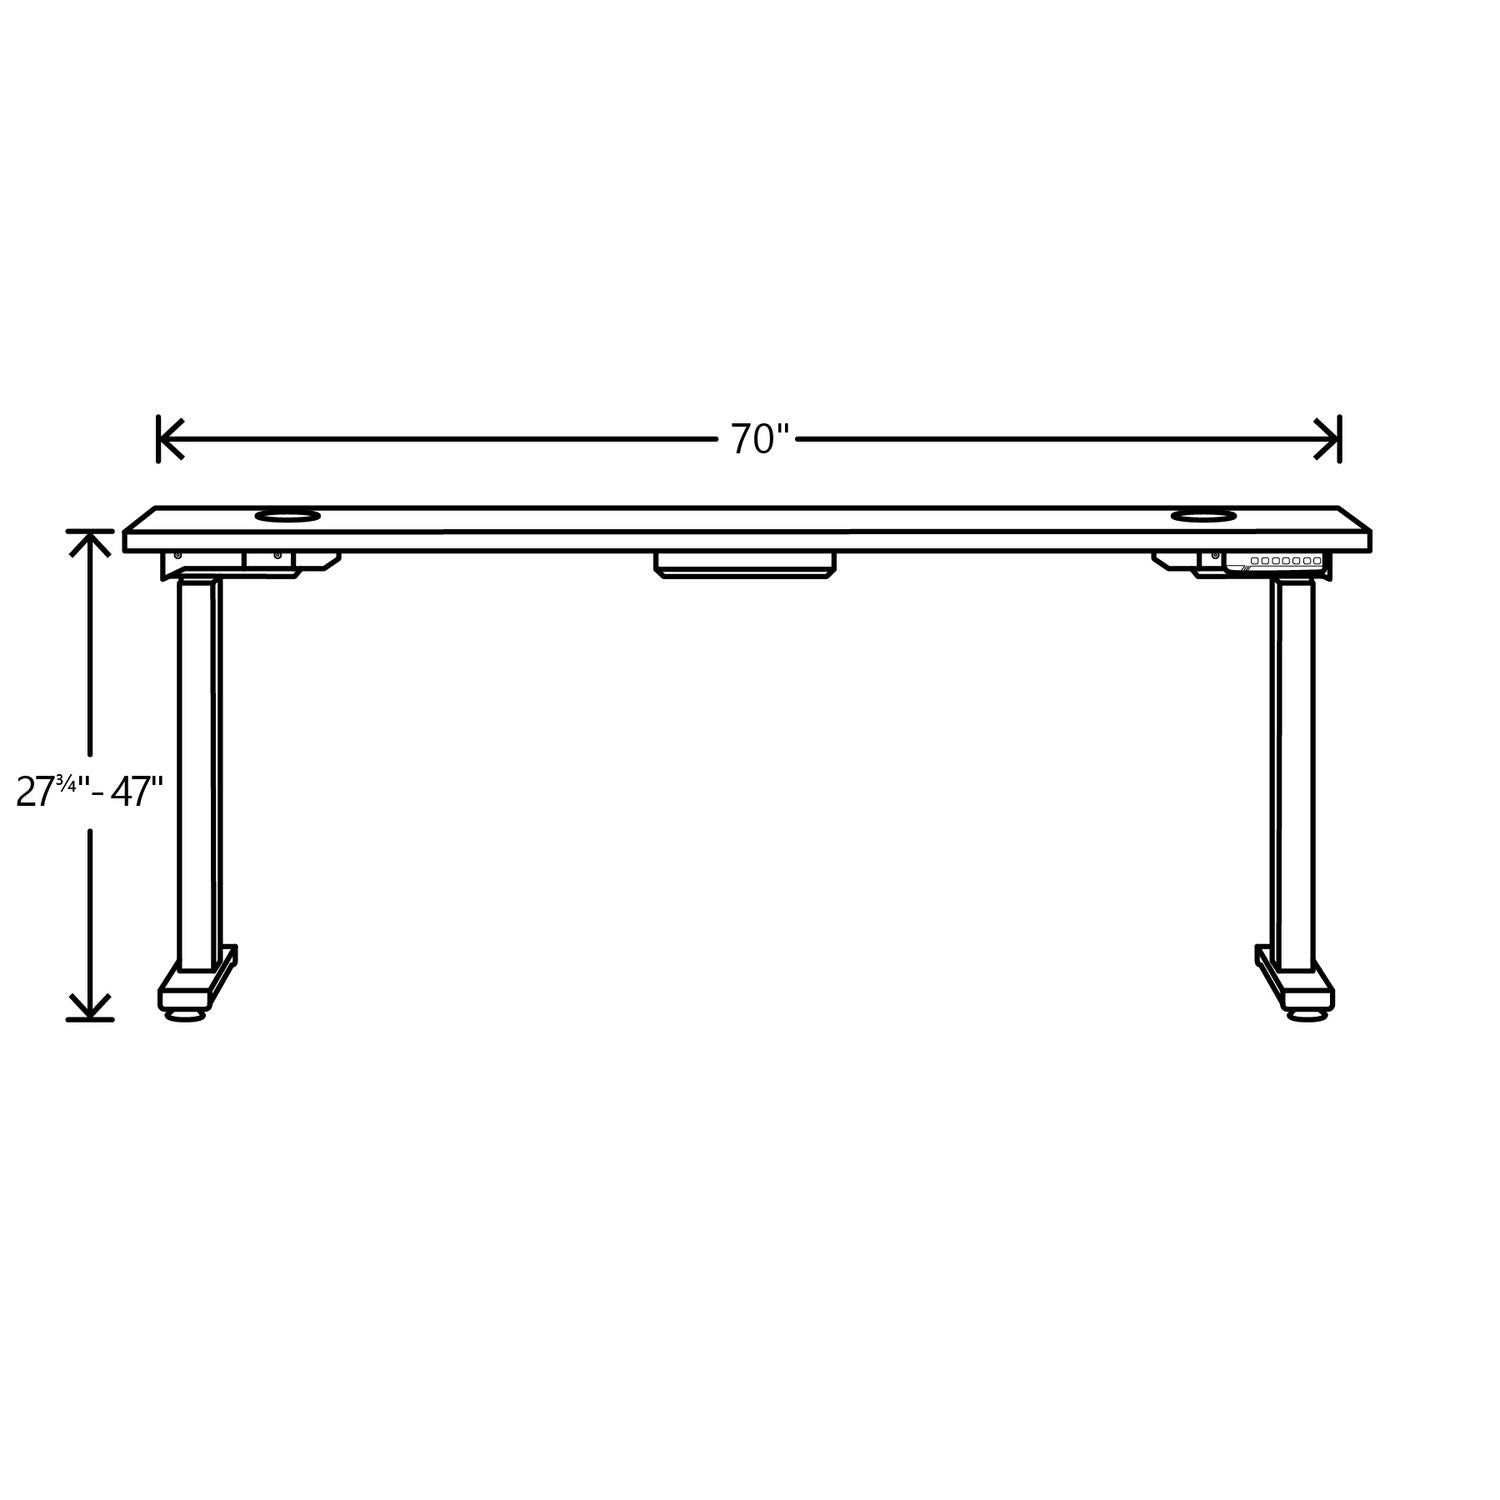 coordinate-height-adjustable-desk-bundle-2-stage-70-x-22-x-2775-to-47-silver-mesh\\silver-ships-in-7-10-business-days_honhat2smsv2270 - 7